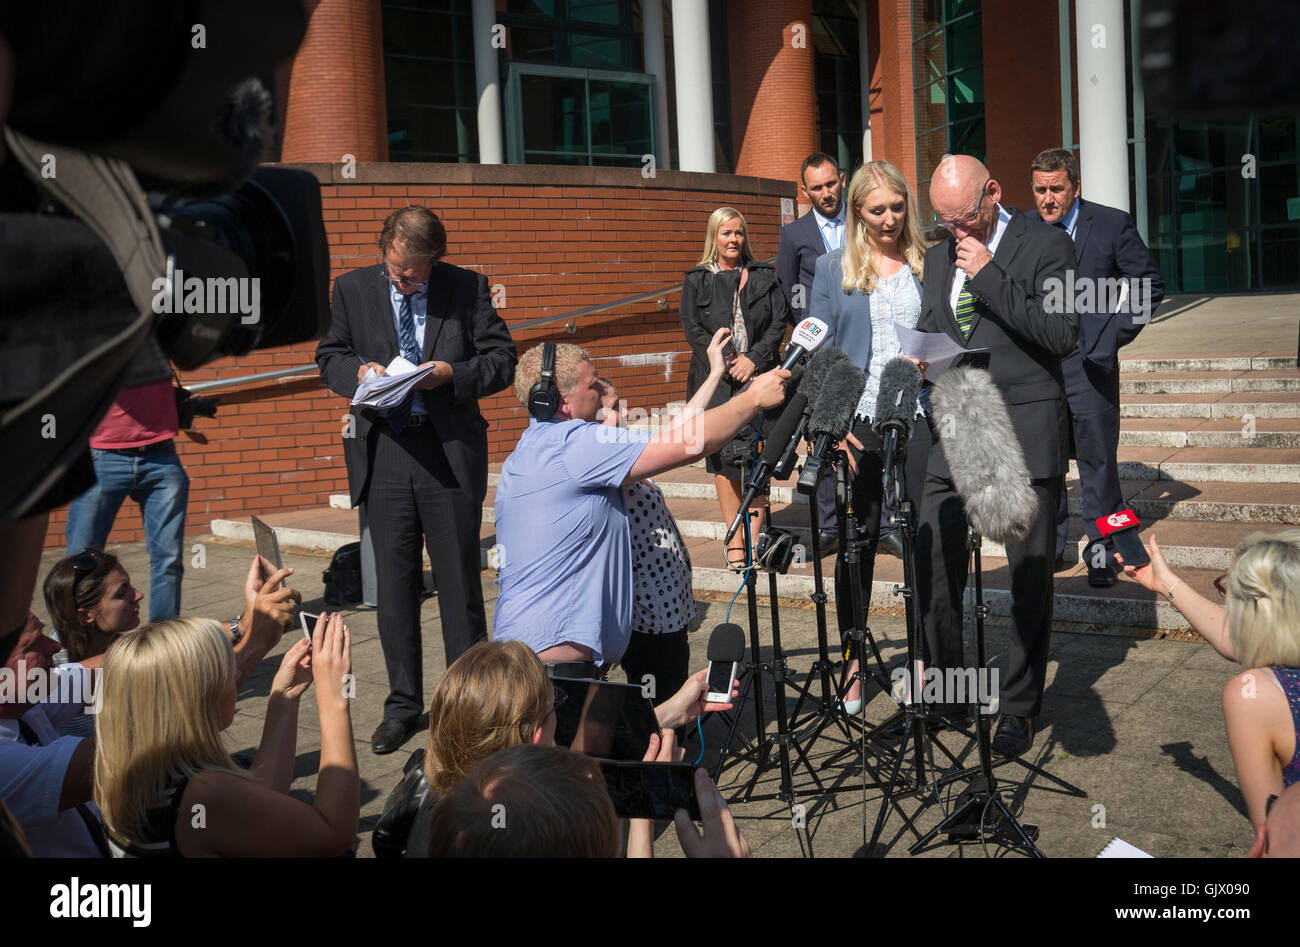 Ian Johnston, partner of murder victim Sadie Hartley, stands with his daughter Hannah, as he issues a statement outside Preston Crown Court, after his 'bunny boiler' ex was jailed for life and ordered to serve a minimum of 30 years in jail for the gruesome stun gun murder of her love rival. Stock Photo